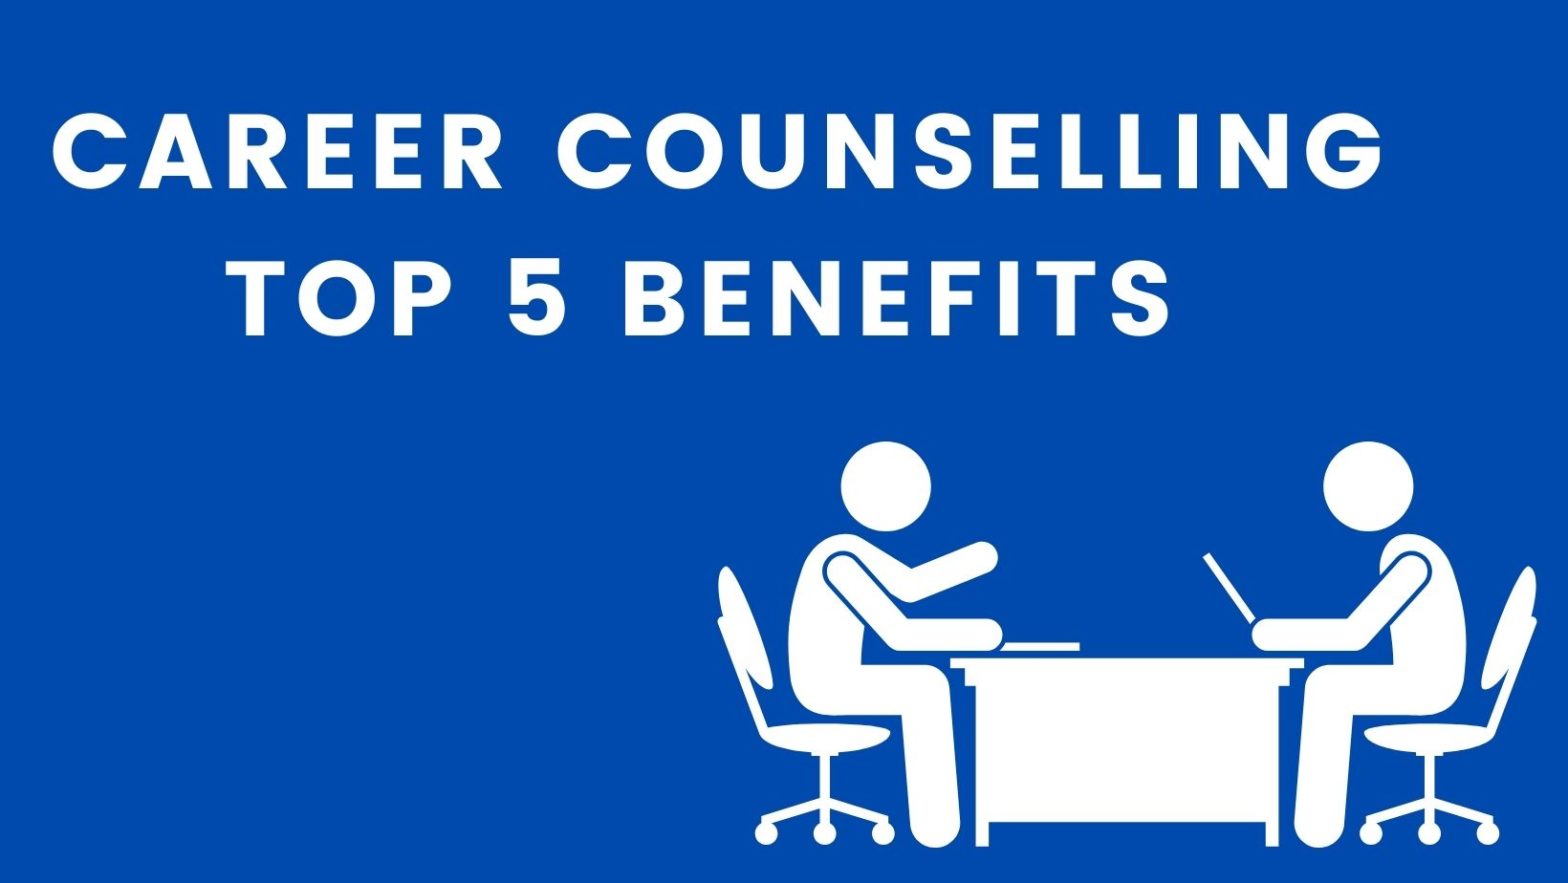 CAREER COUNSELLING - TOP 5 BENEFITS